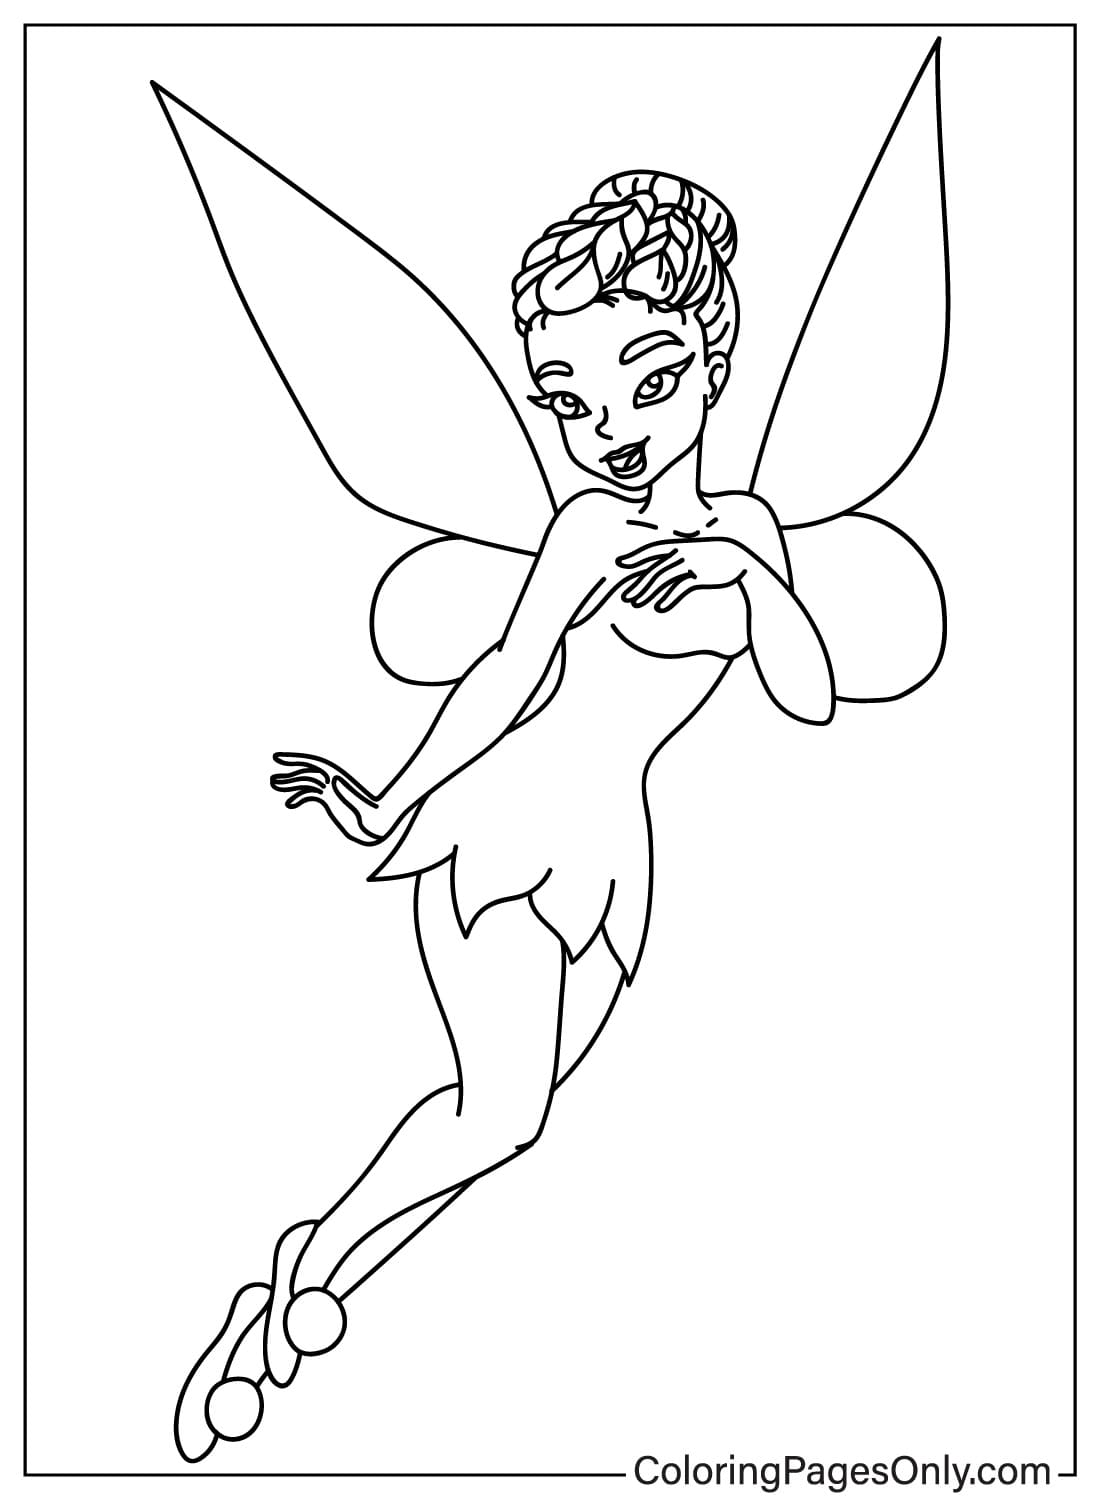 Coloring pages only on x tinkerbell coloring pages black tinkerbell in peter pan and wendy httpstcolfcxh tinkerbell blacktinkerbell disney yarashahidi coloringpagesonly coloringpages coloringbook art fanart sketch drawing